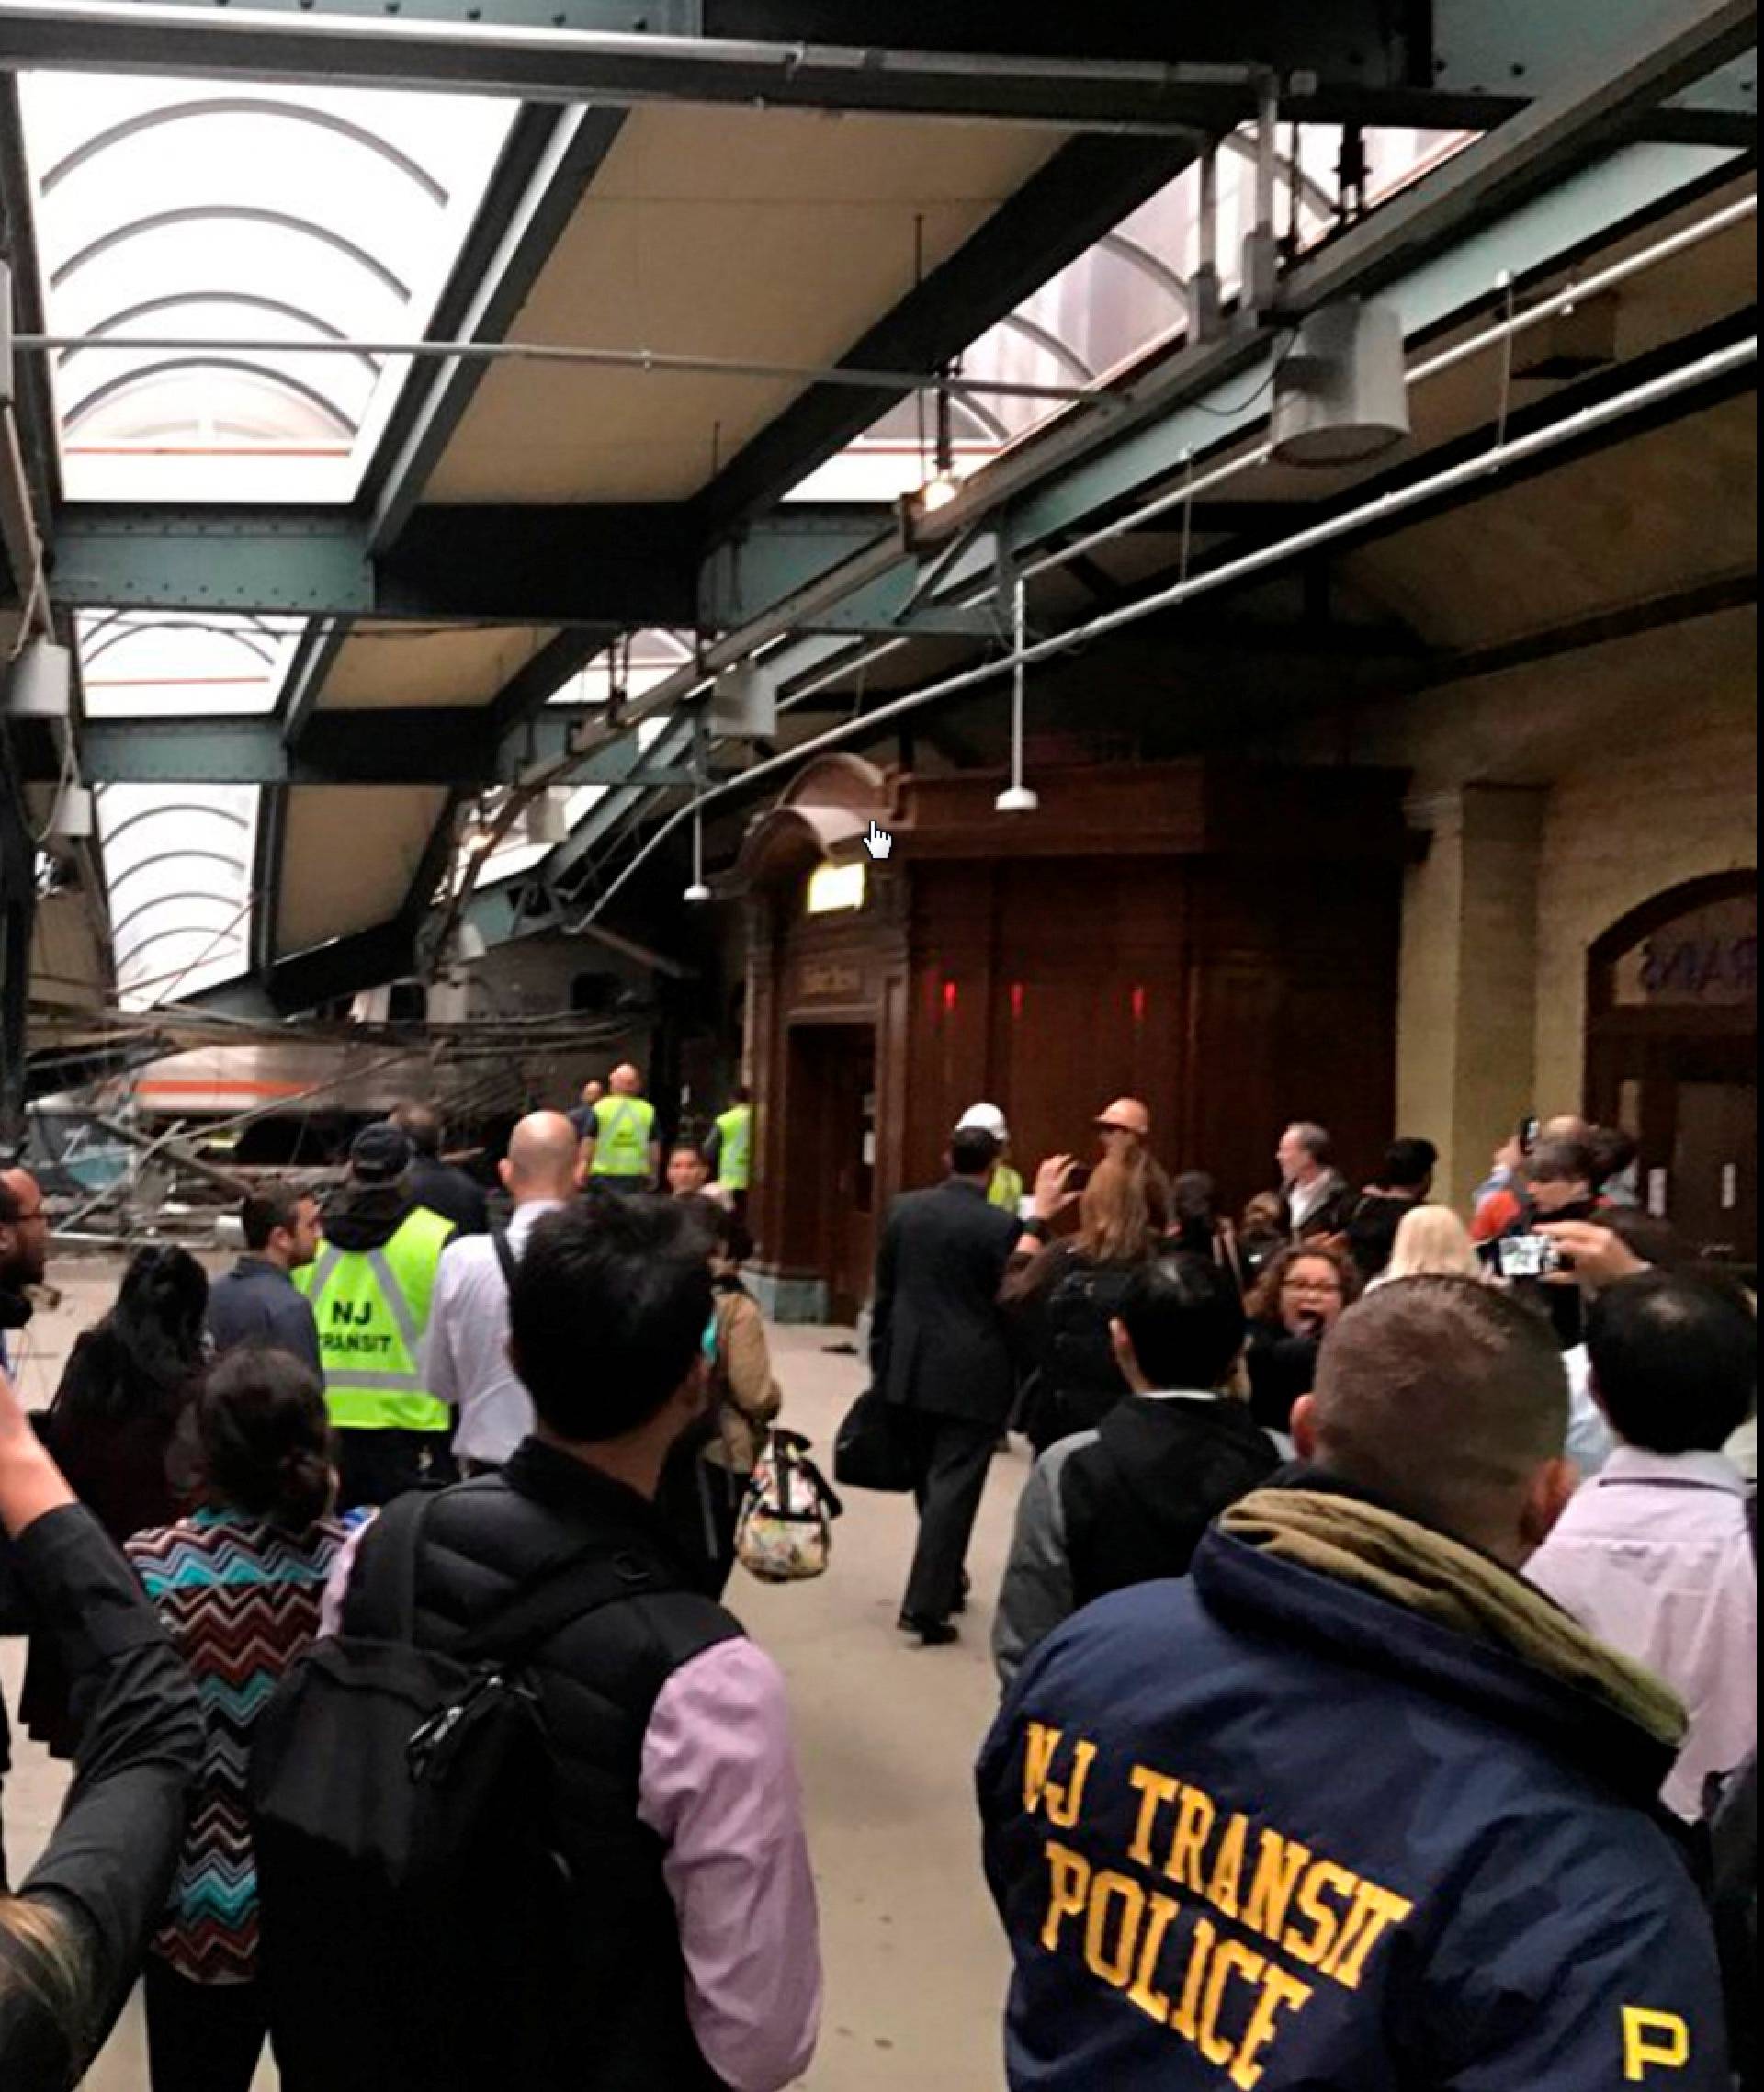 Onlookers view a New Jersey Transit train that derailed and crashed through the station in Hoboken